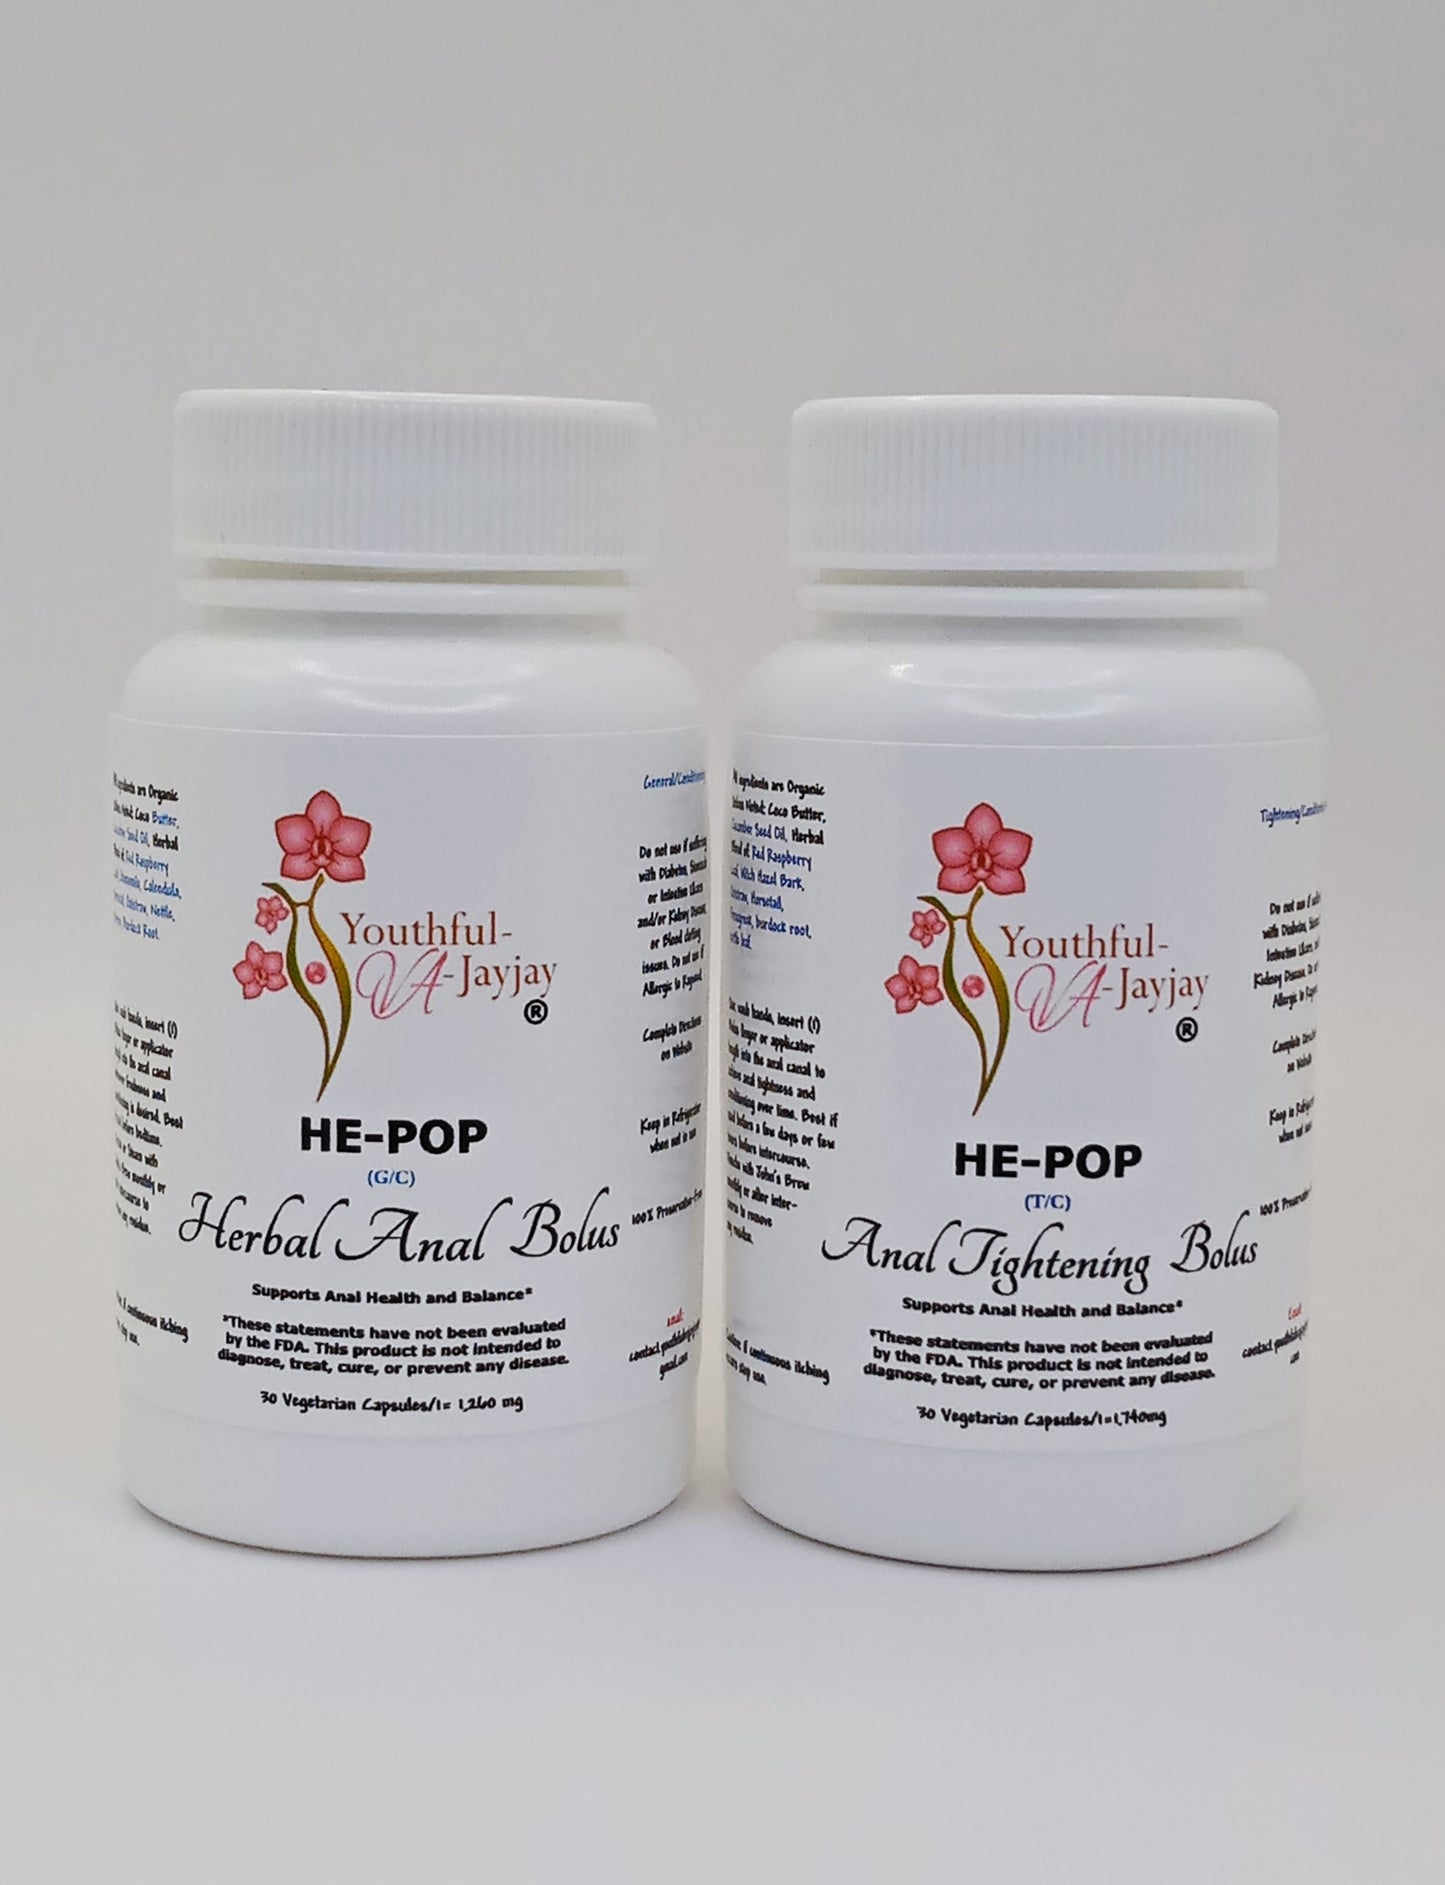 HE-POP: Organic Herbal Anal Bolus: For Him- Tightening, 30 capsules- 1,740mg